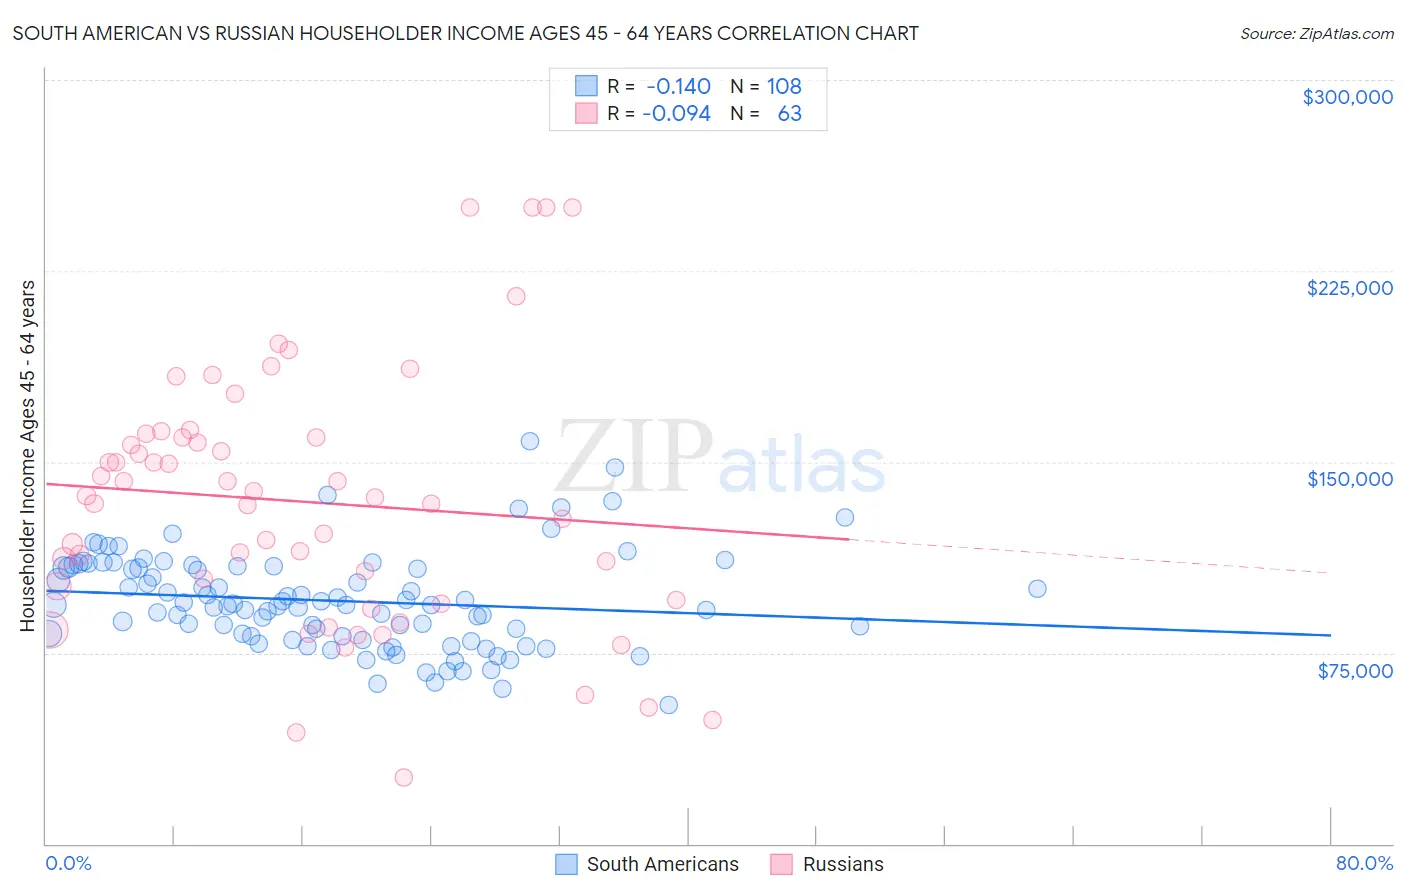 South American vs Russian Householder Income Ages 45 - 64 years